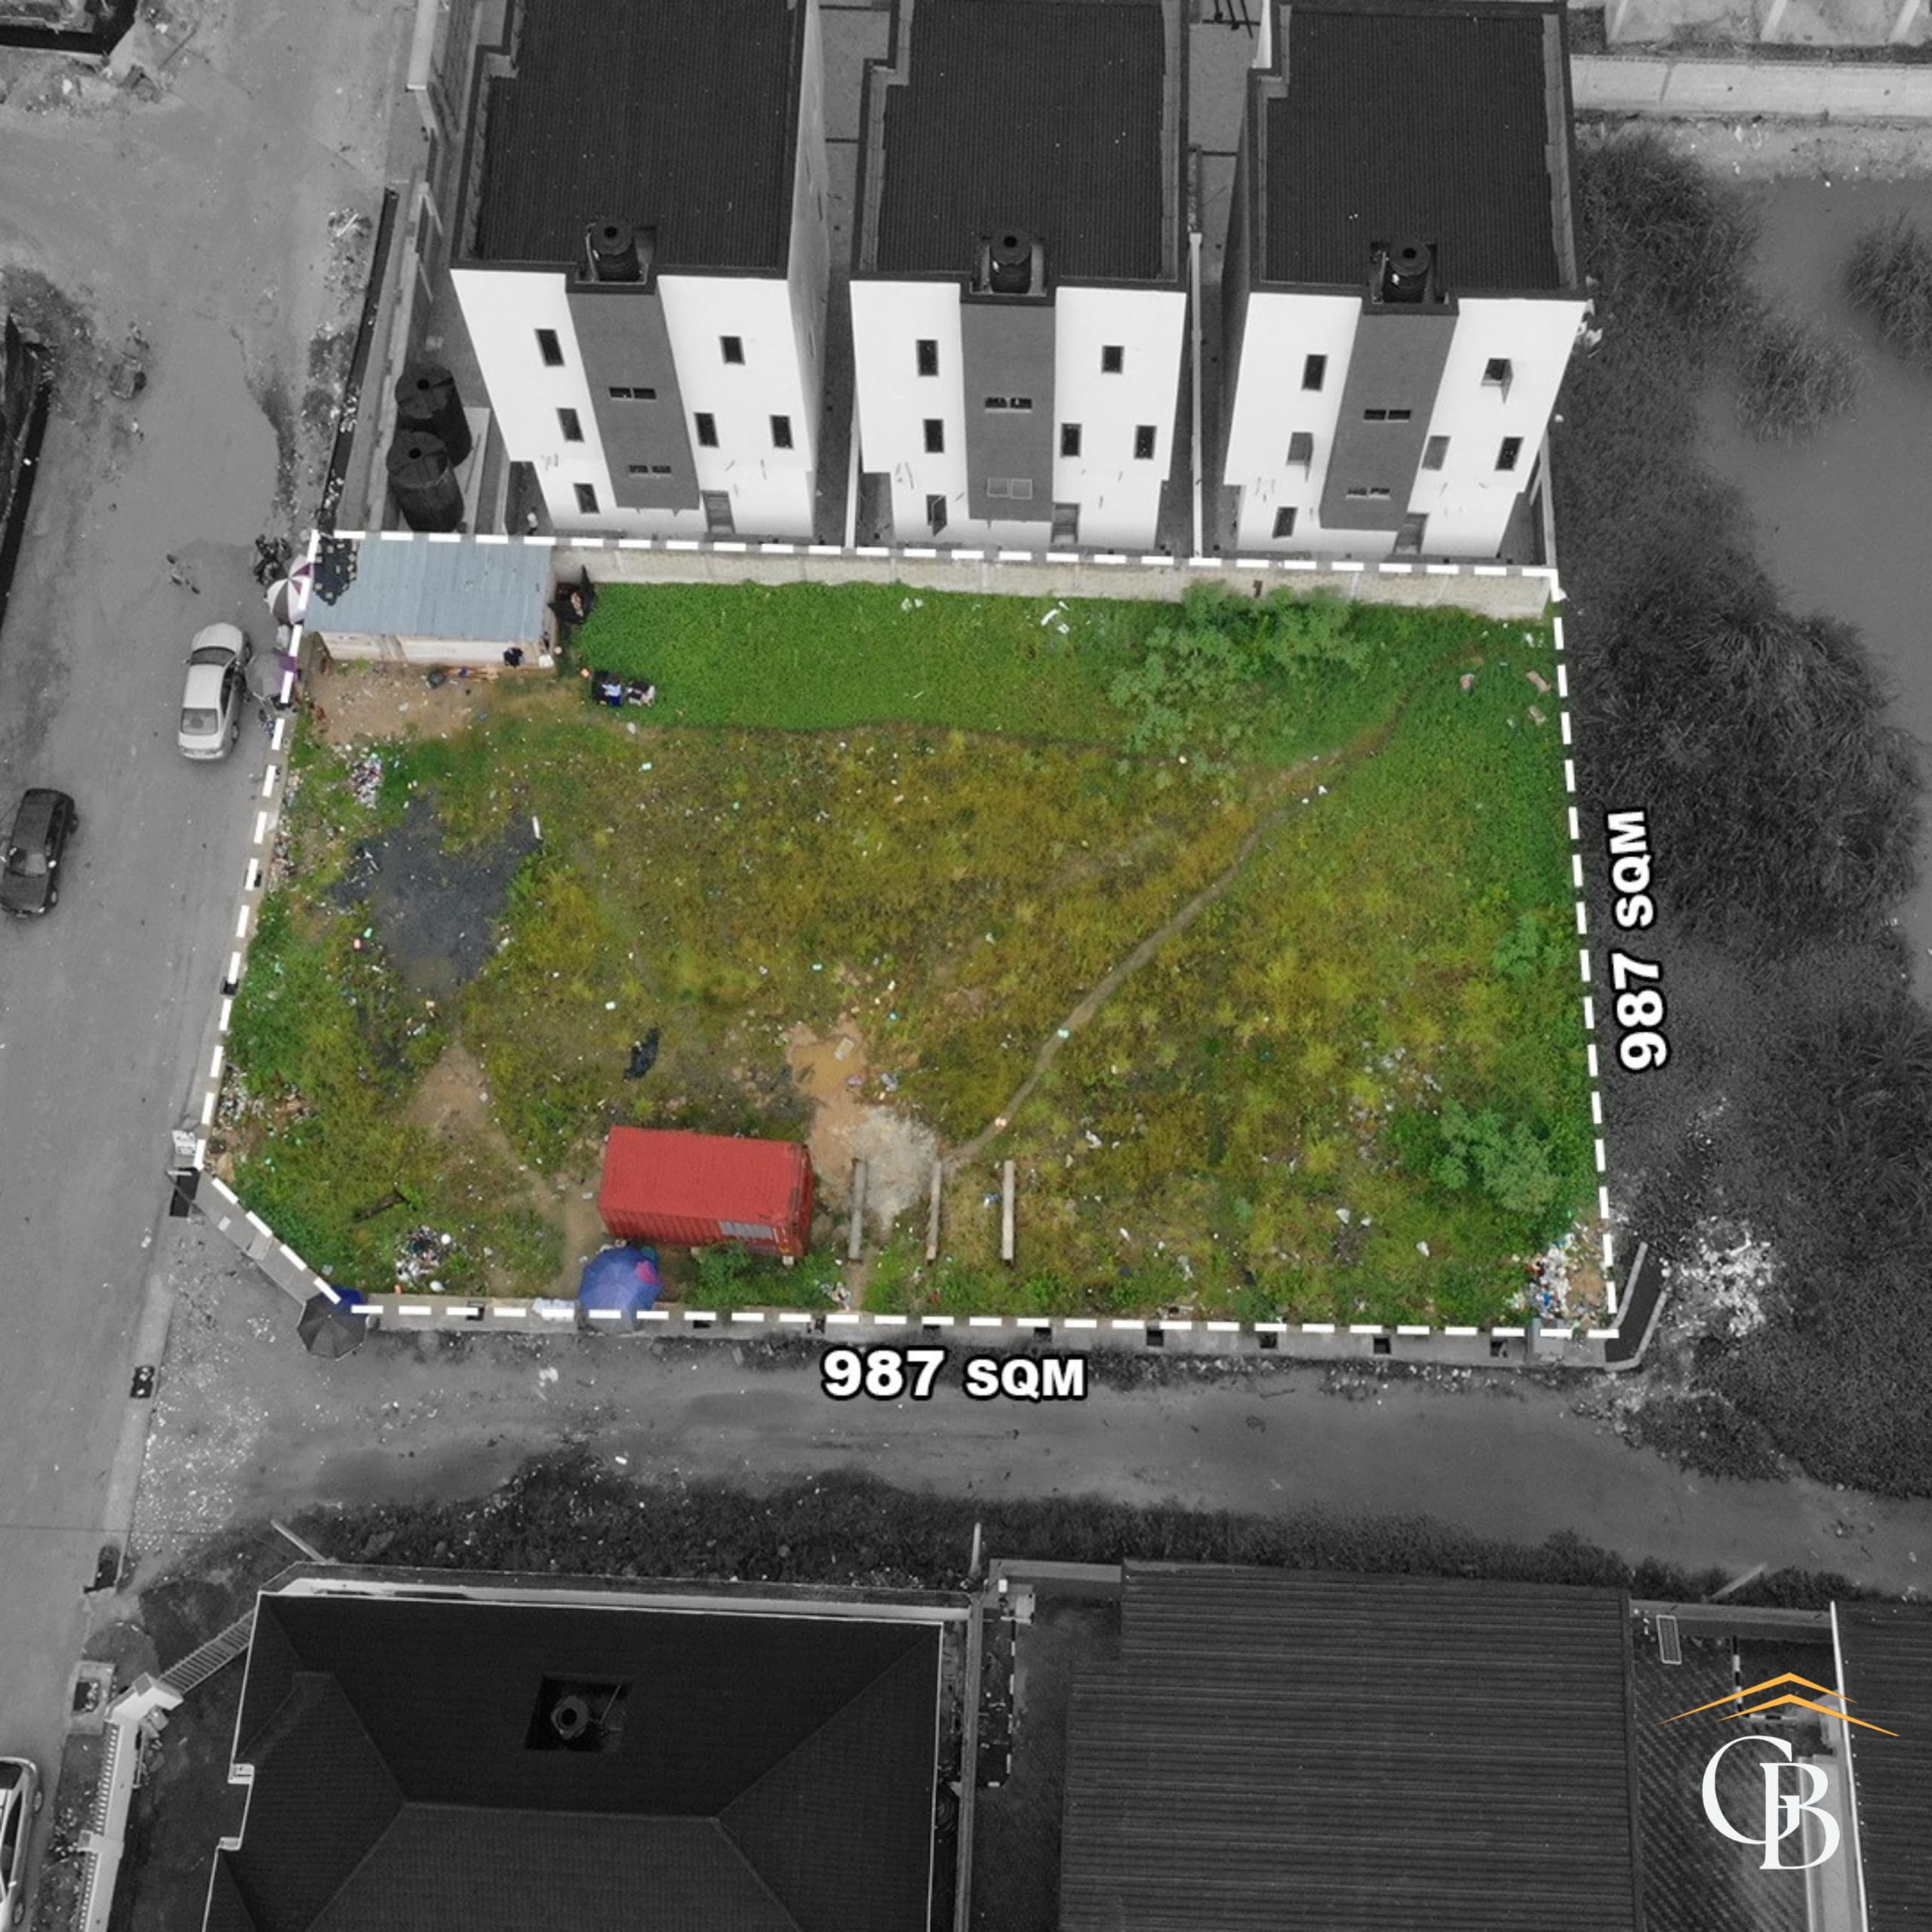 Incredible Opportunity Alert! Own this prime corner piece of land measuring 987 SQM located in Lekki Lagos for a good price